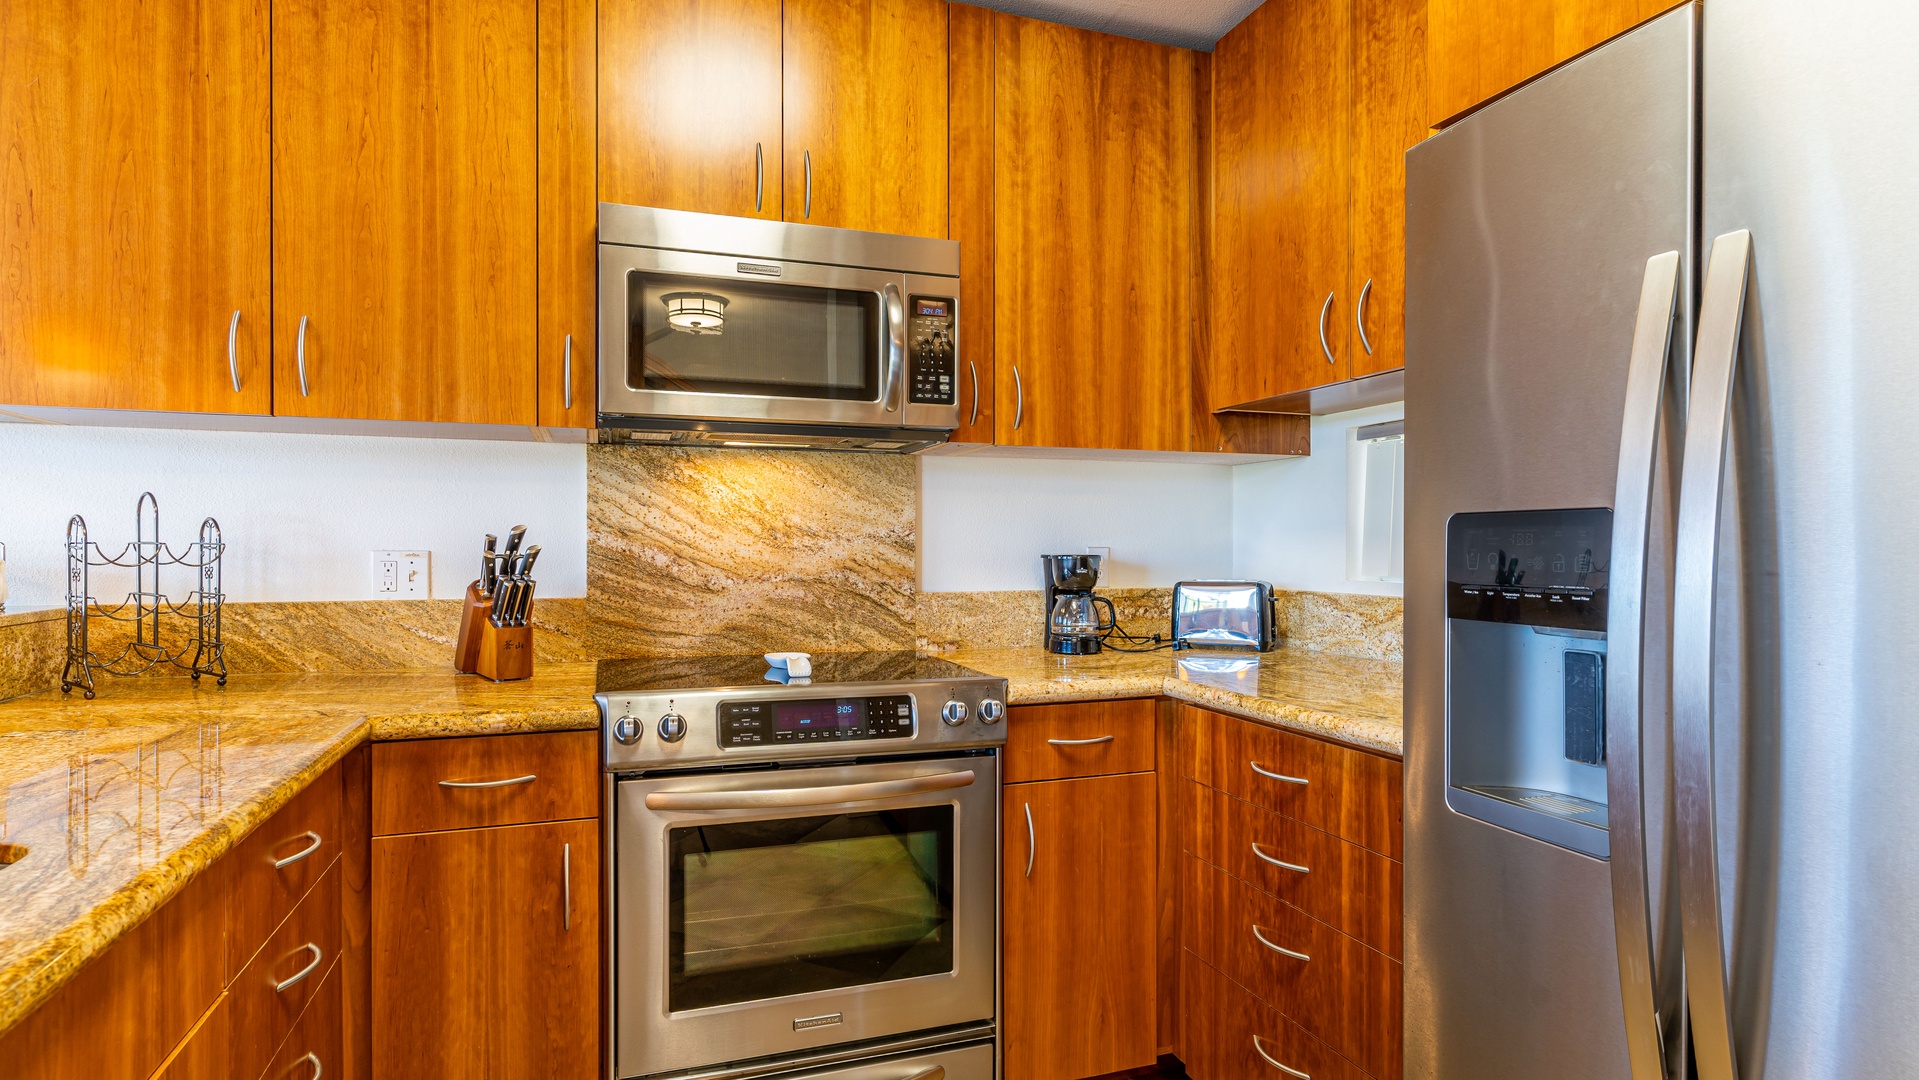 Kapolei Vacation Rentals, Fairways at Ko Olina 20G - Gracious amenities for your culinary adventures in the kitchen.